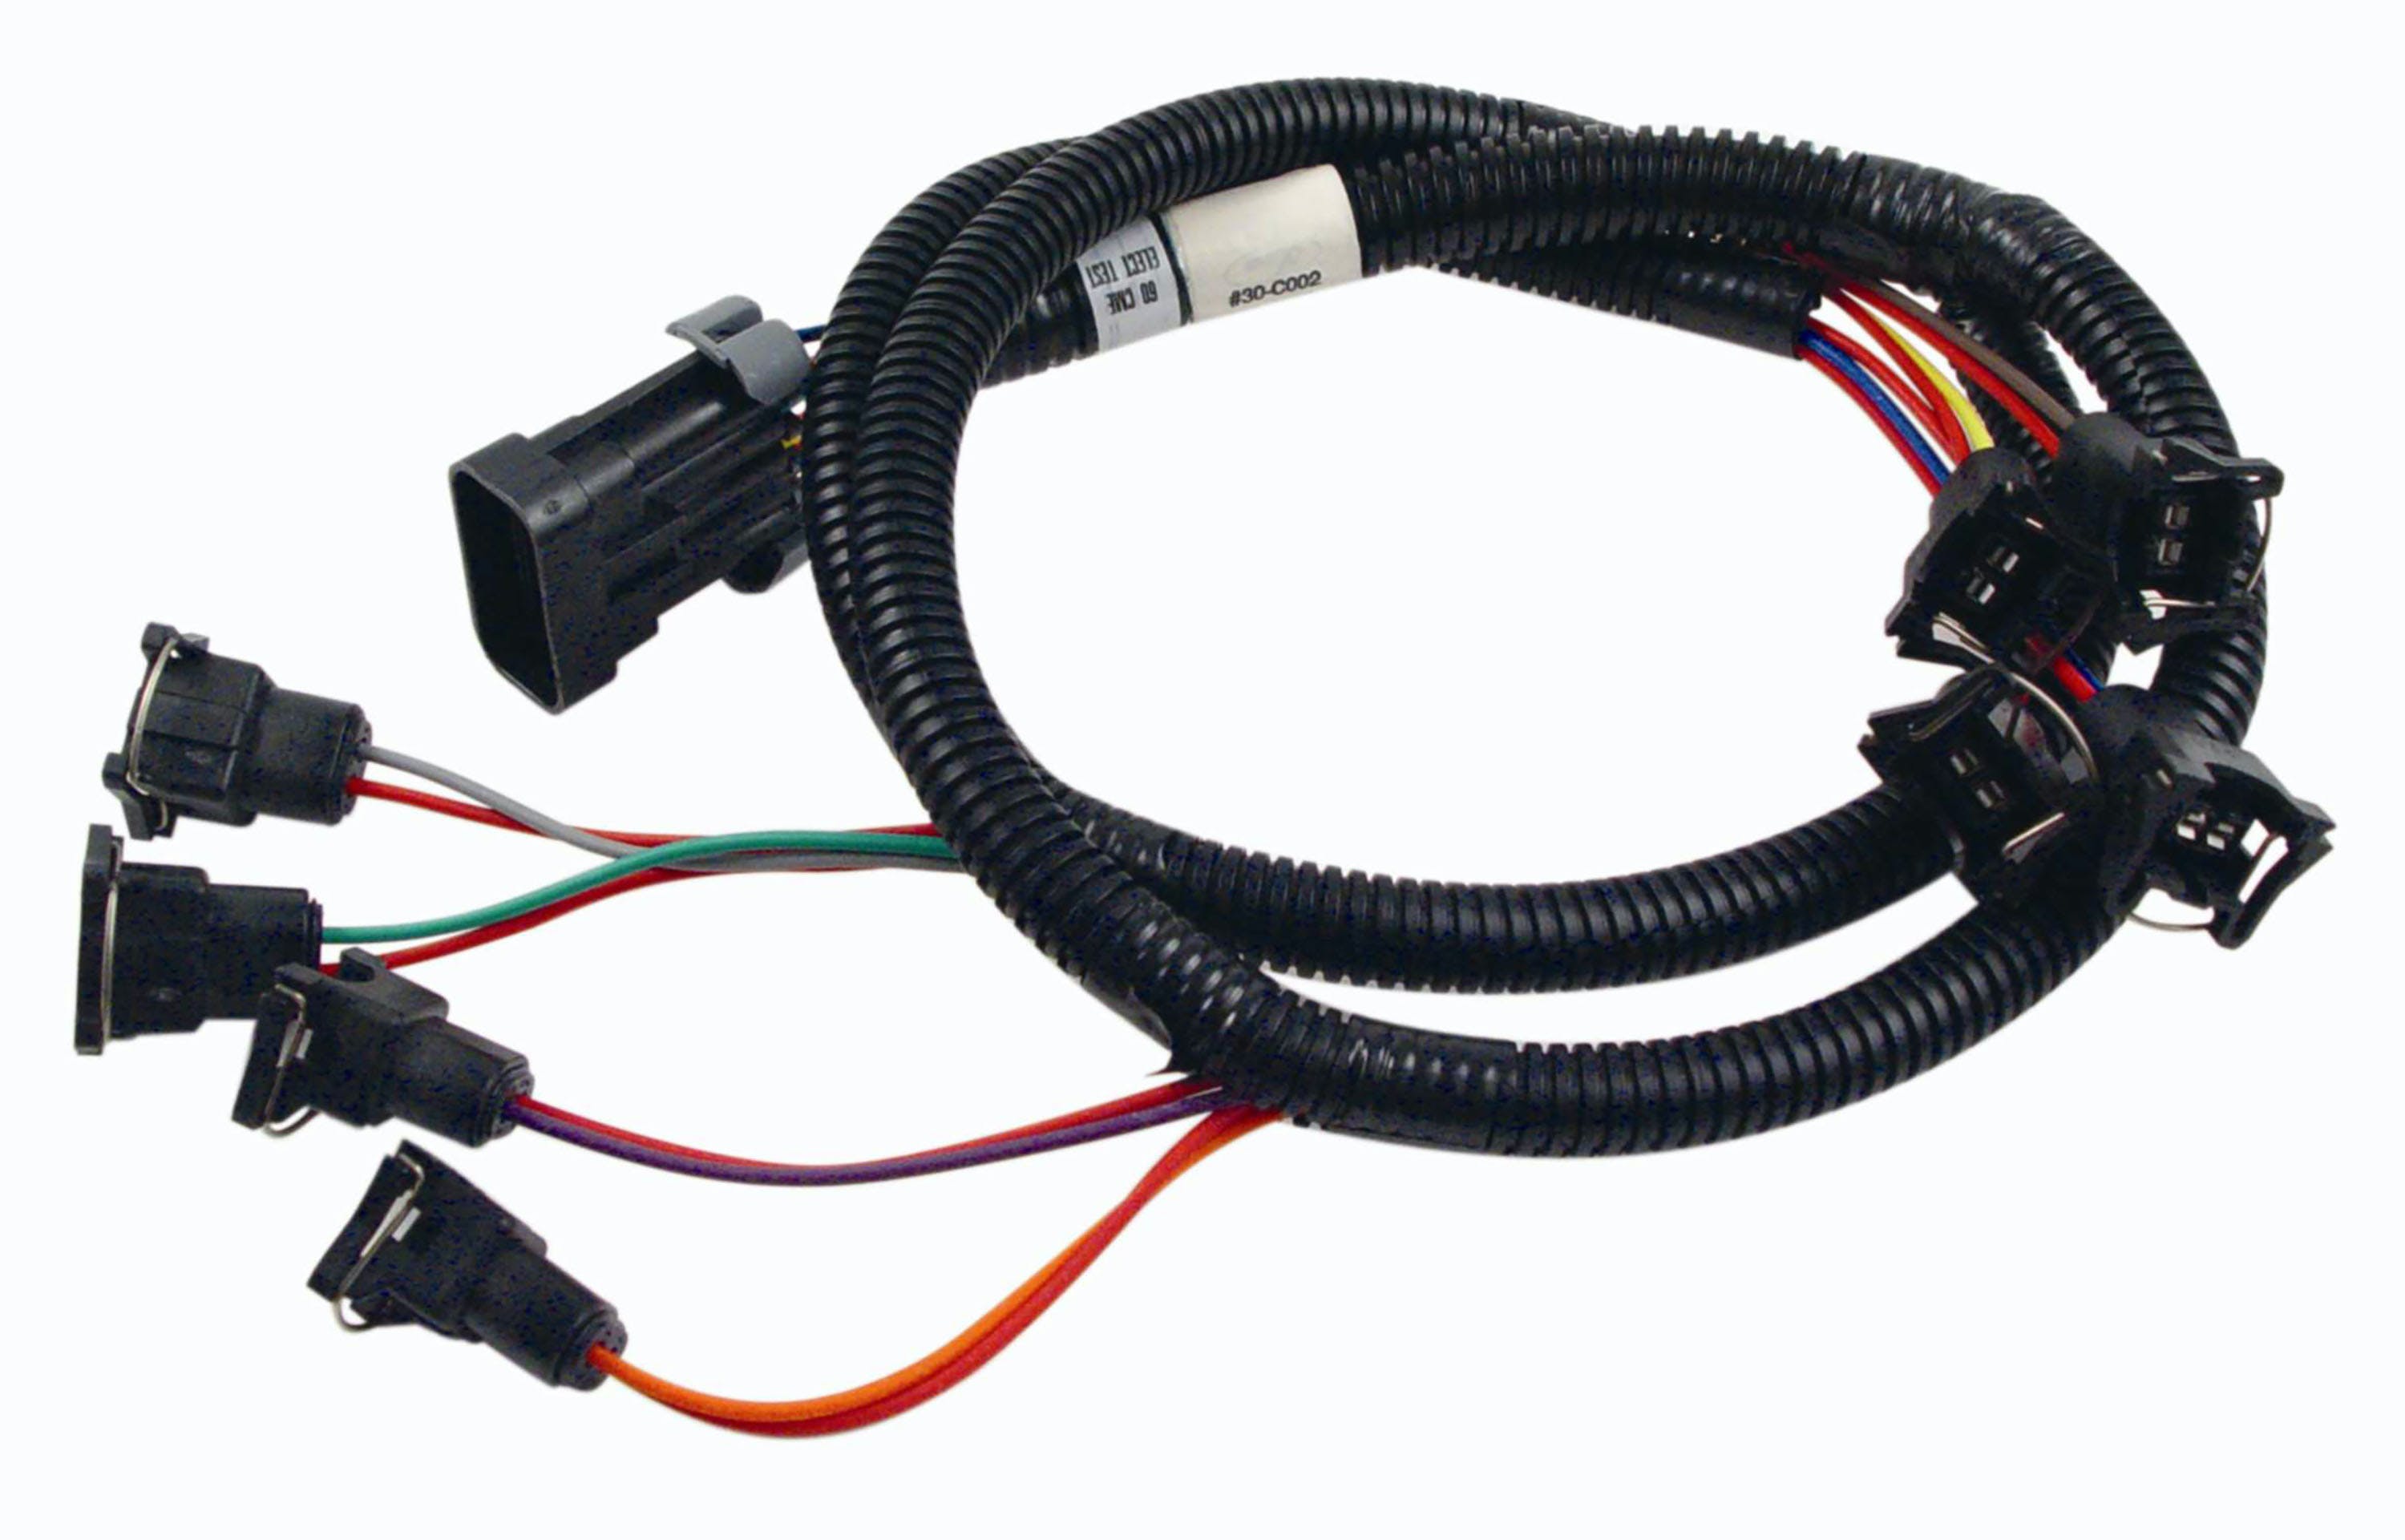 FAST - Fuel Air Spark Technology 301202 XFI Fuel Inector Harness for GM LS Series engines.